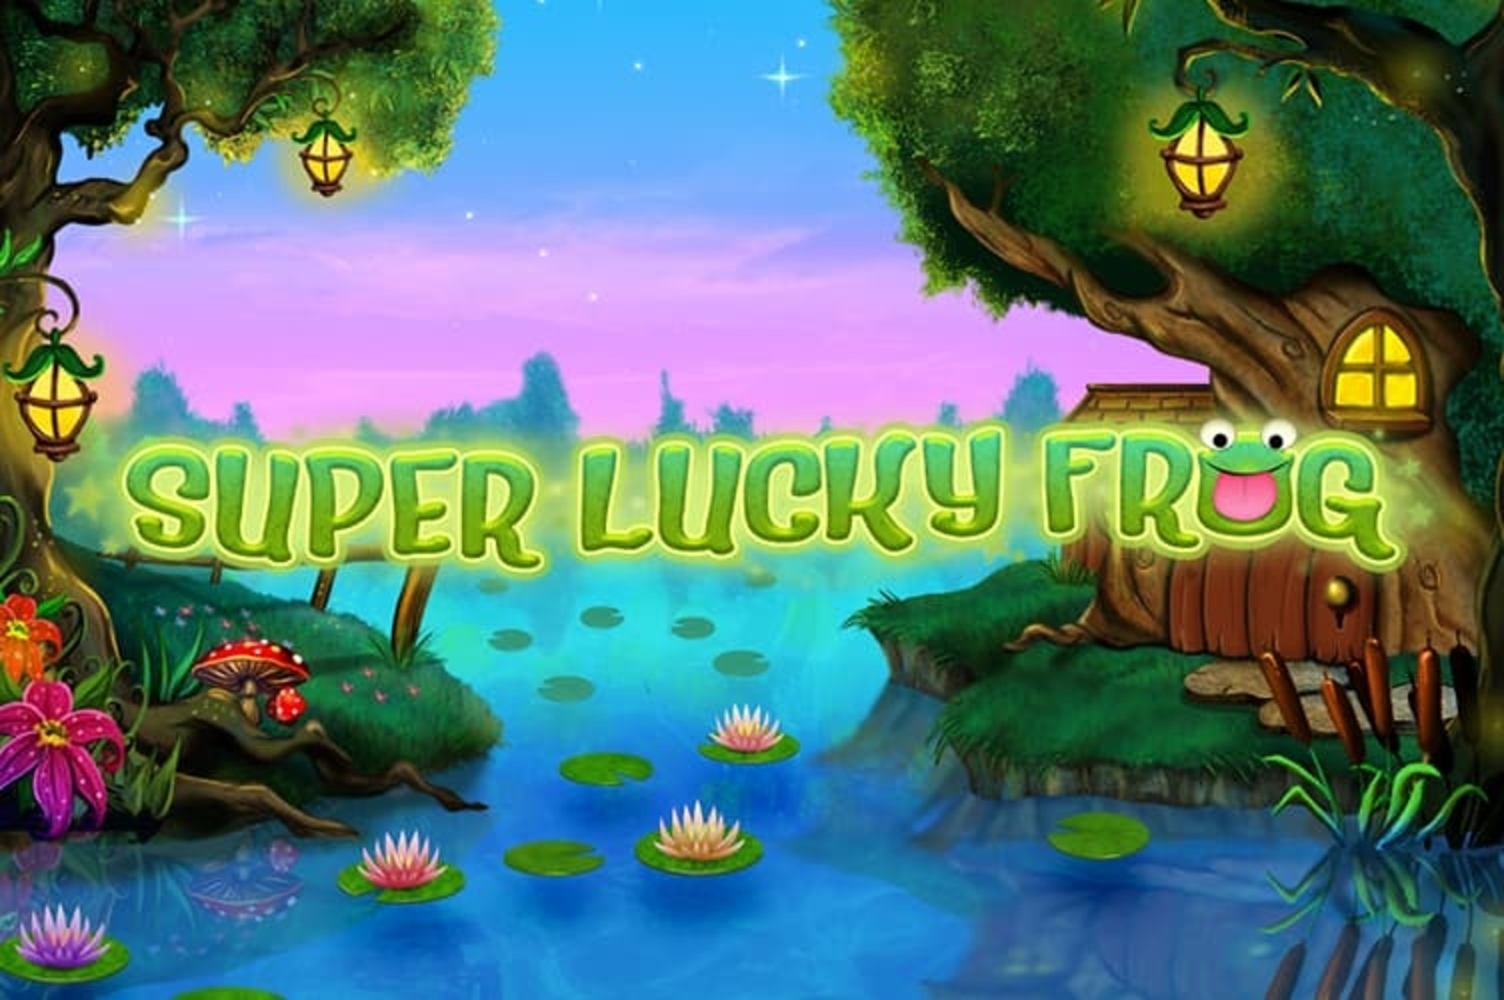 Super Lucky Frog demo